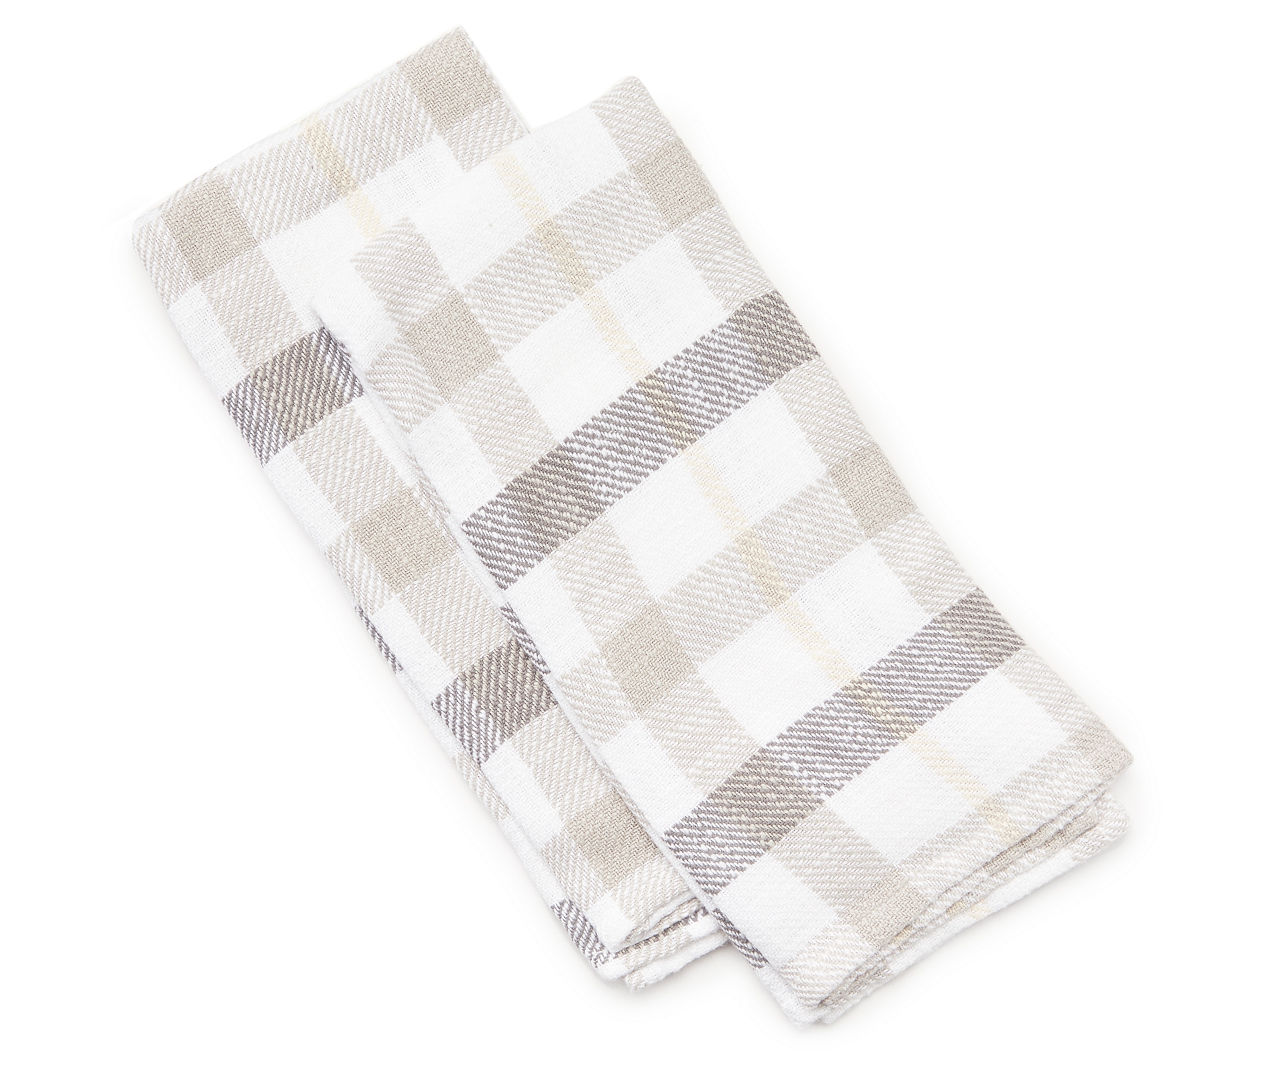 All-Clad Plaid Kitchen Towels in Chili (Set of 2), 2 Pack - Foods Co.